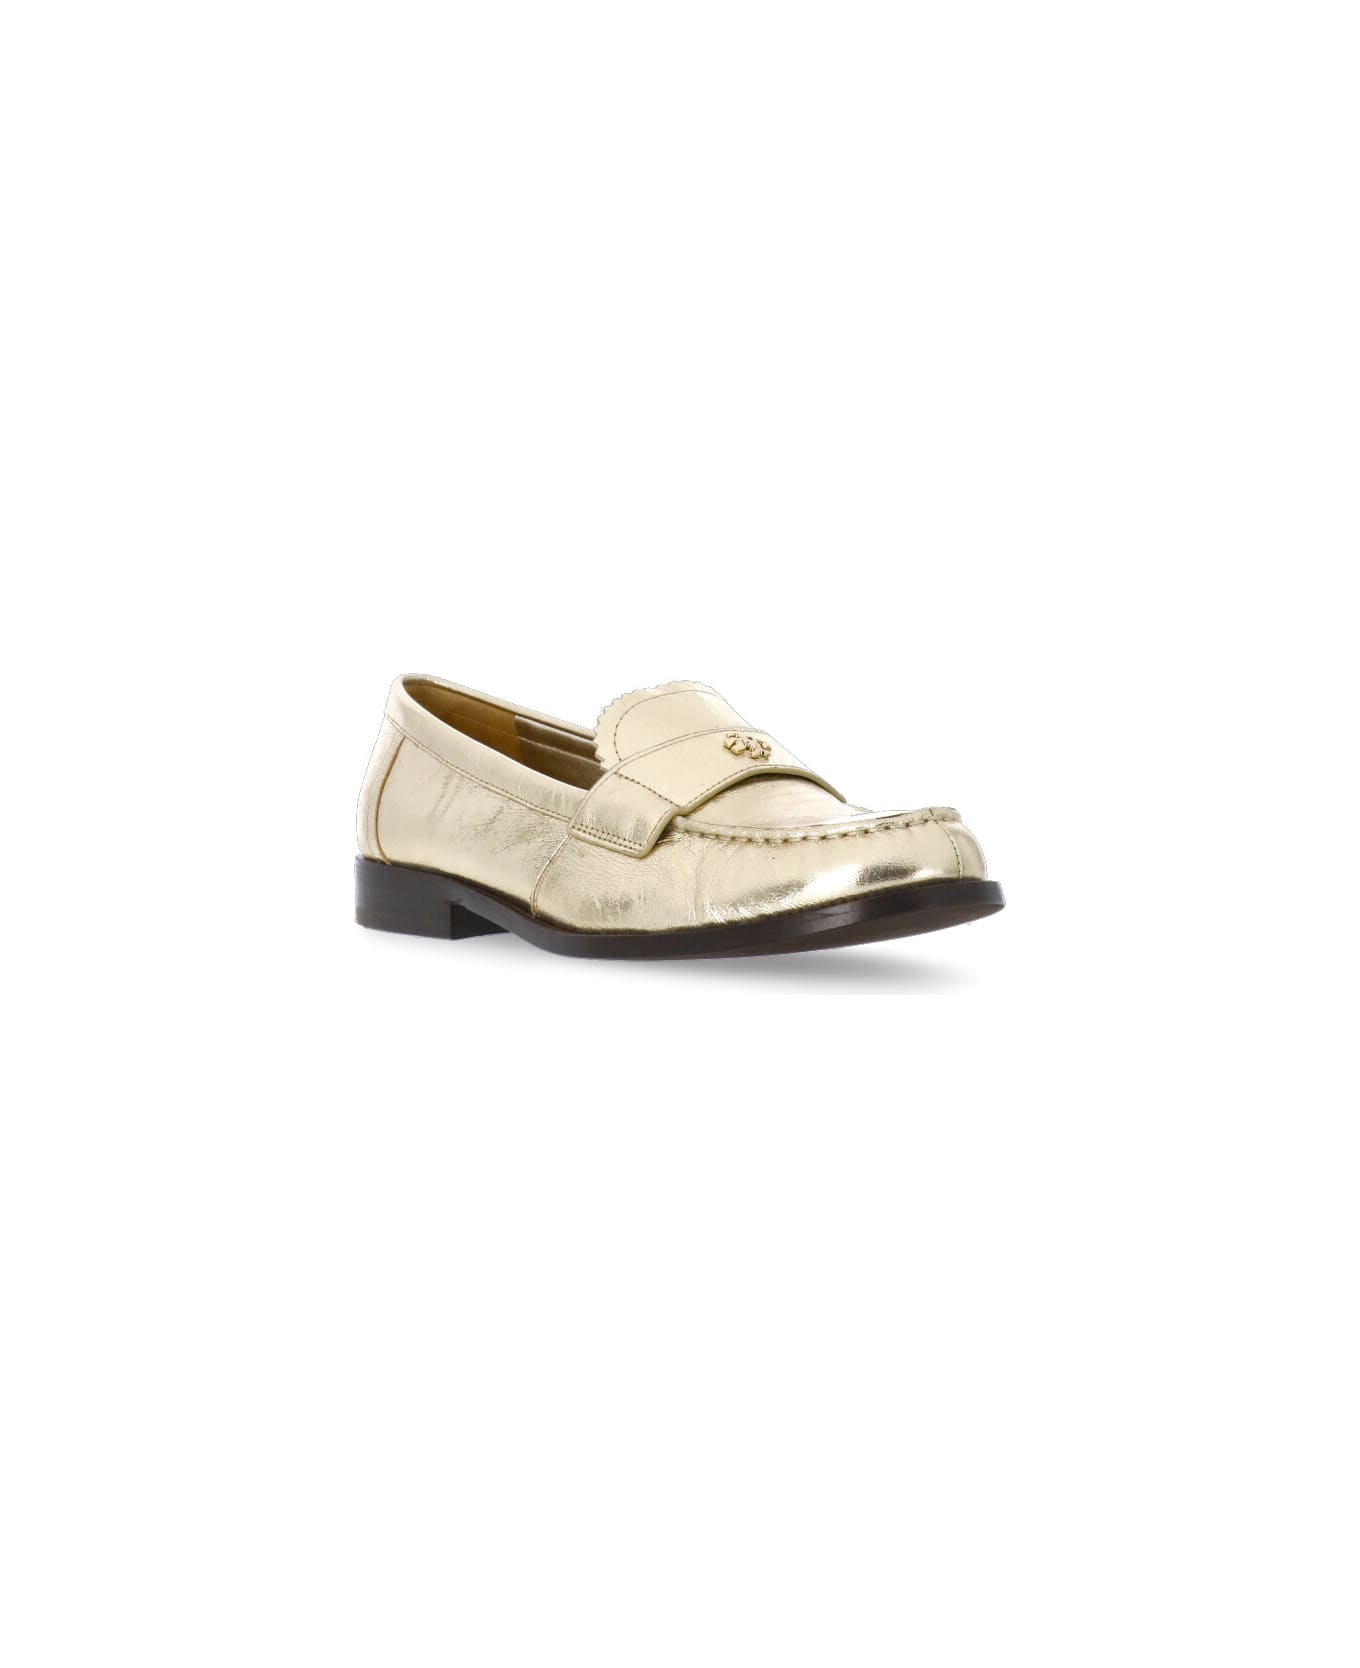 Tory Burch Leather Loafer - Golden